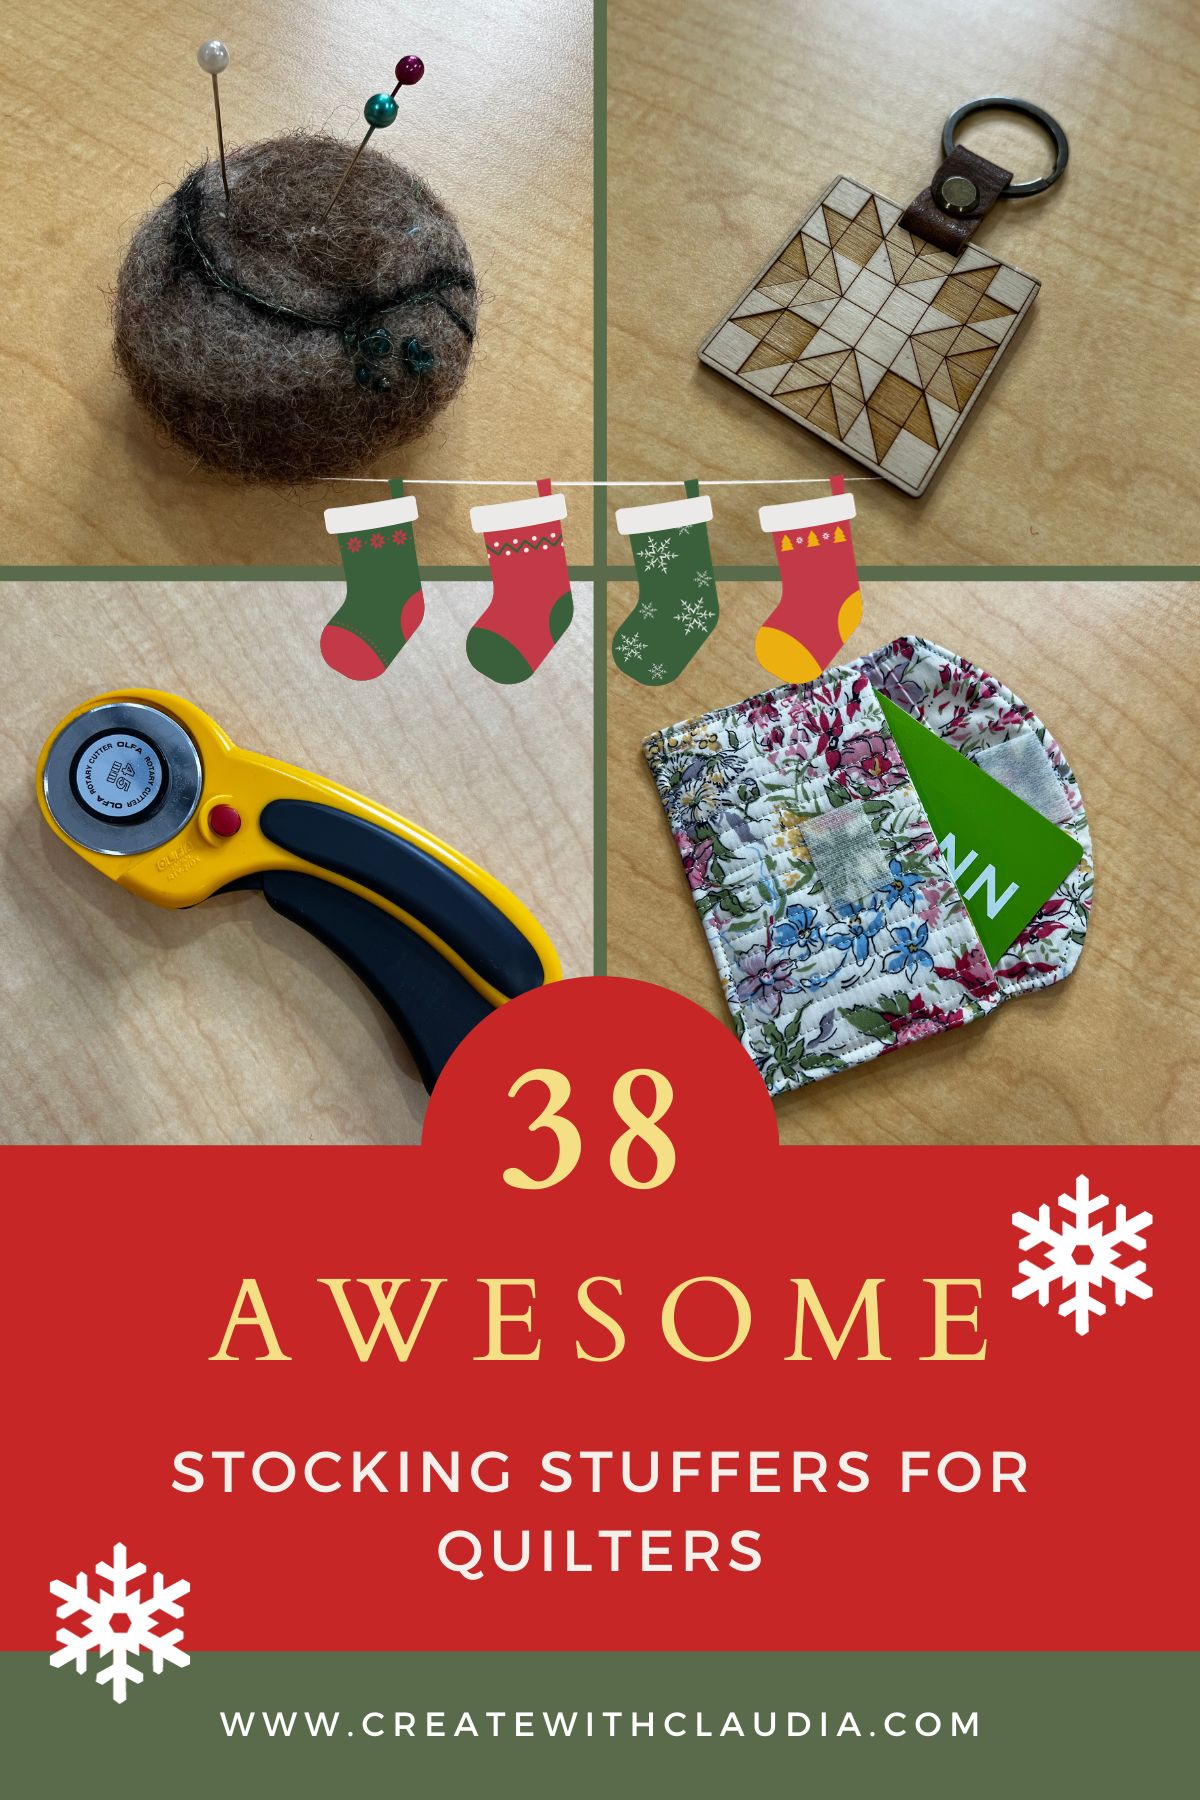 38 Awesome Stocking Stuffers for Quilters - Create with Claudia